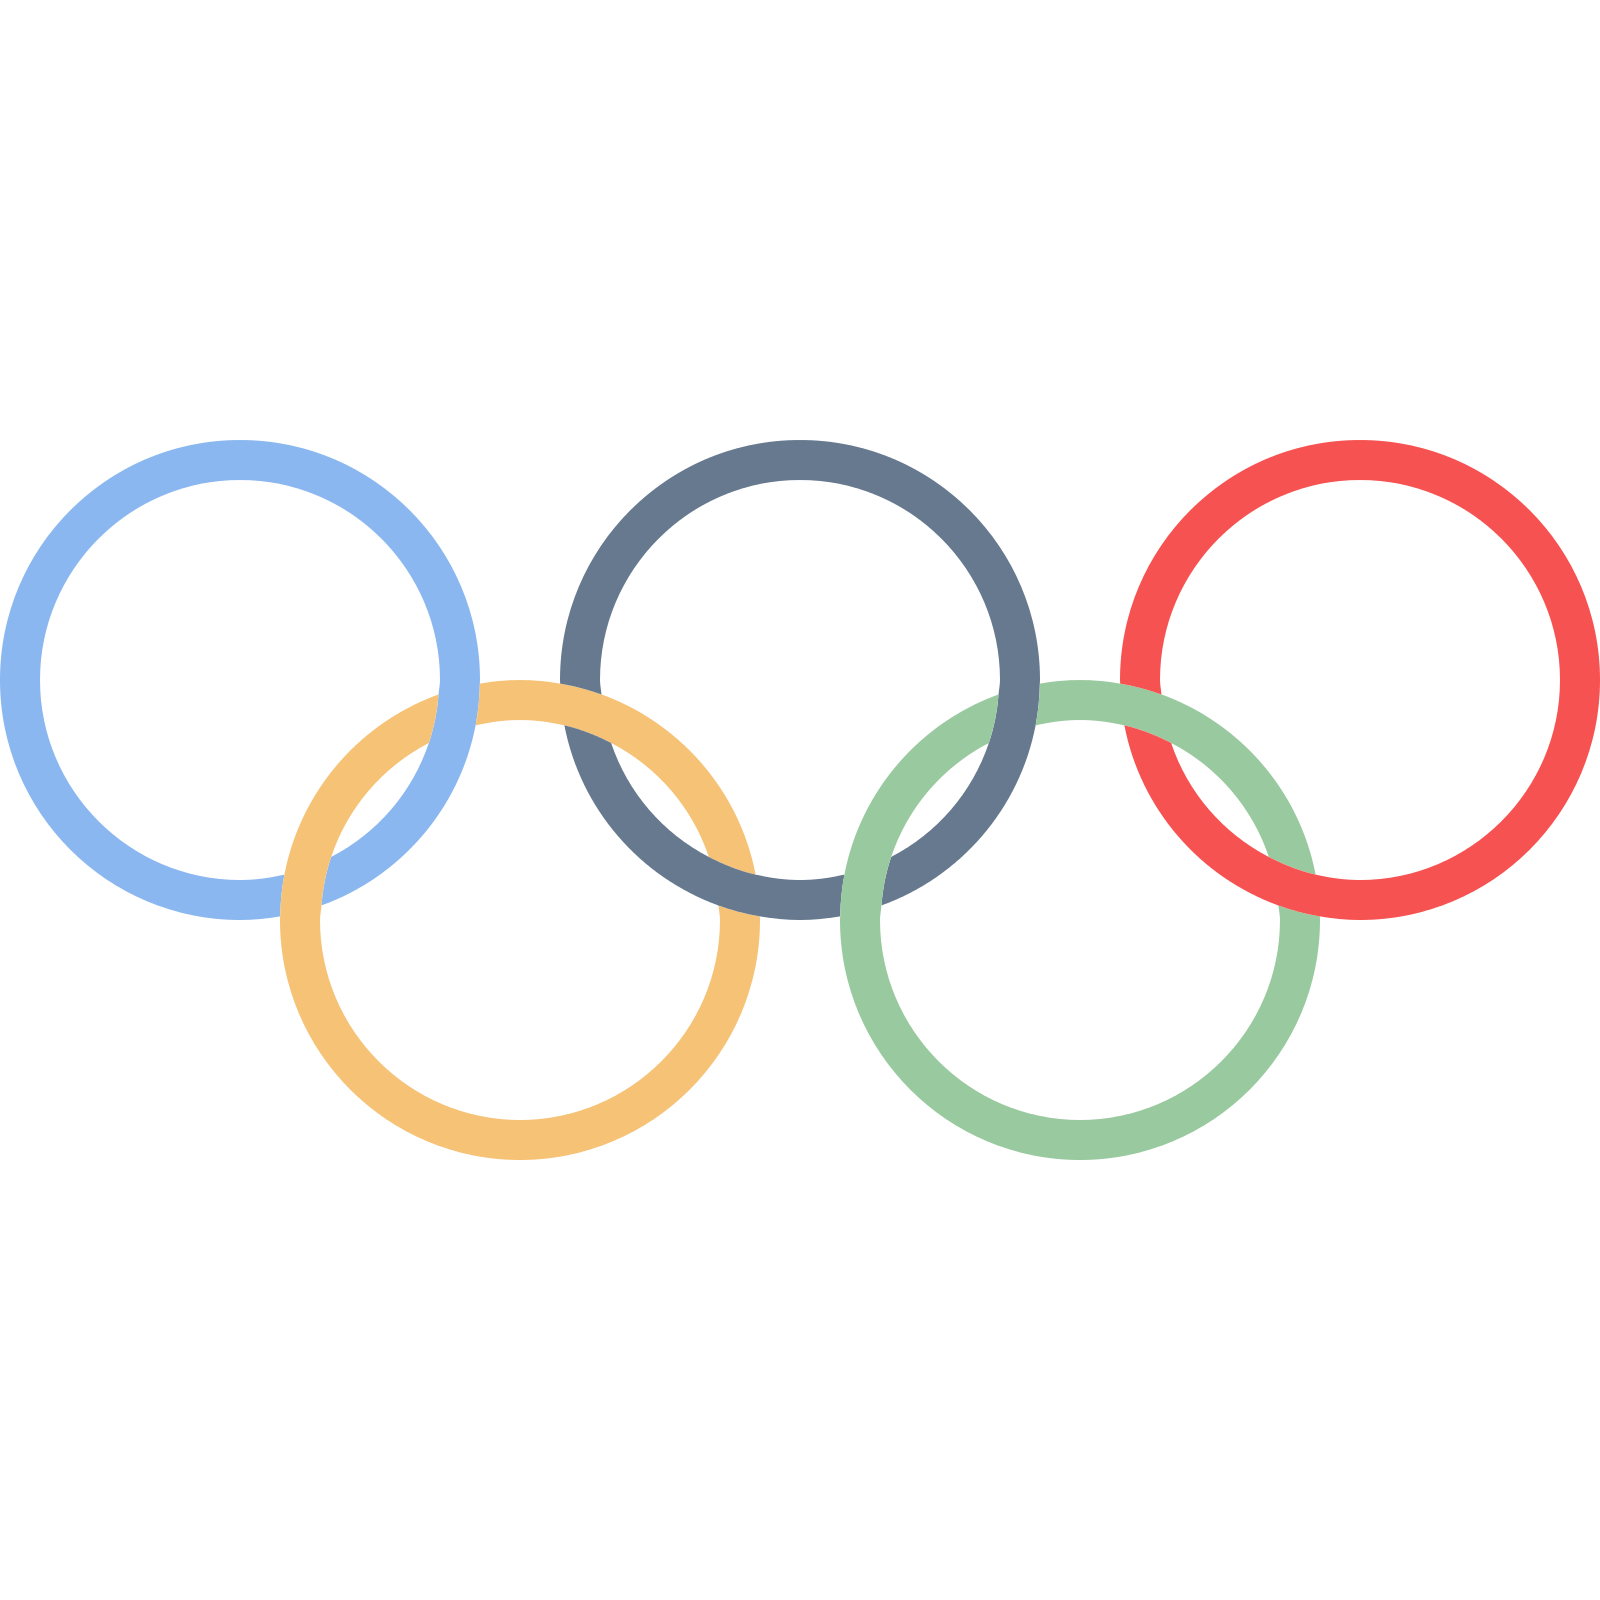 Olympic Rings Clipart at GetDrawings Free download